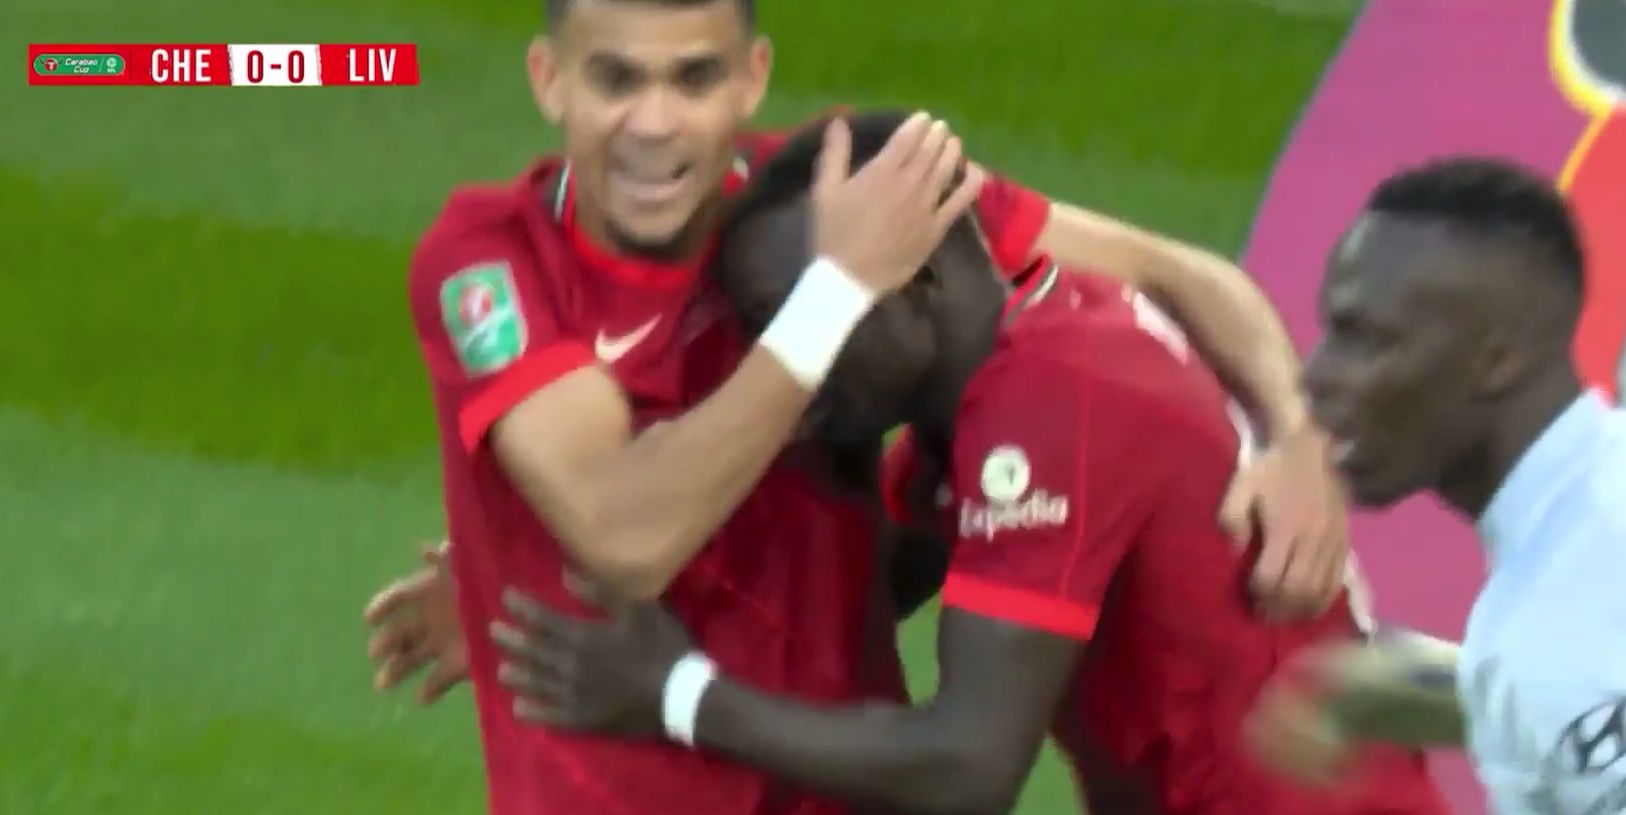 (Video) Luis Diaz rushes to console Sadio Mane after his Wembley shot was saved by Edouard Mendy